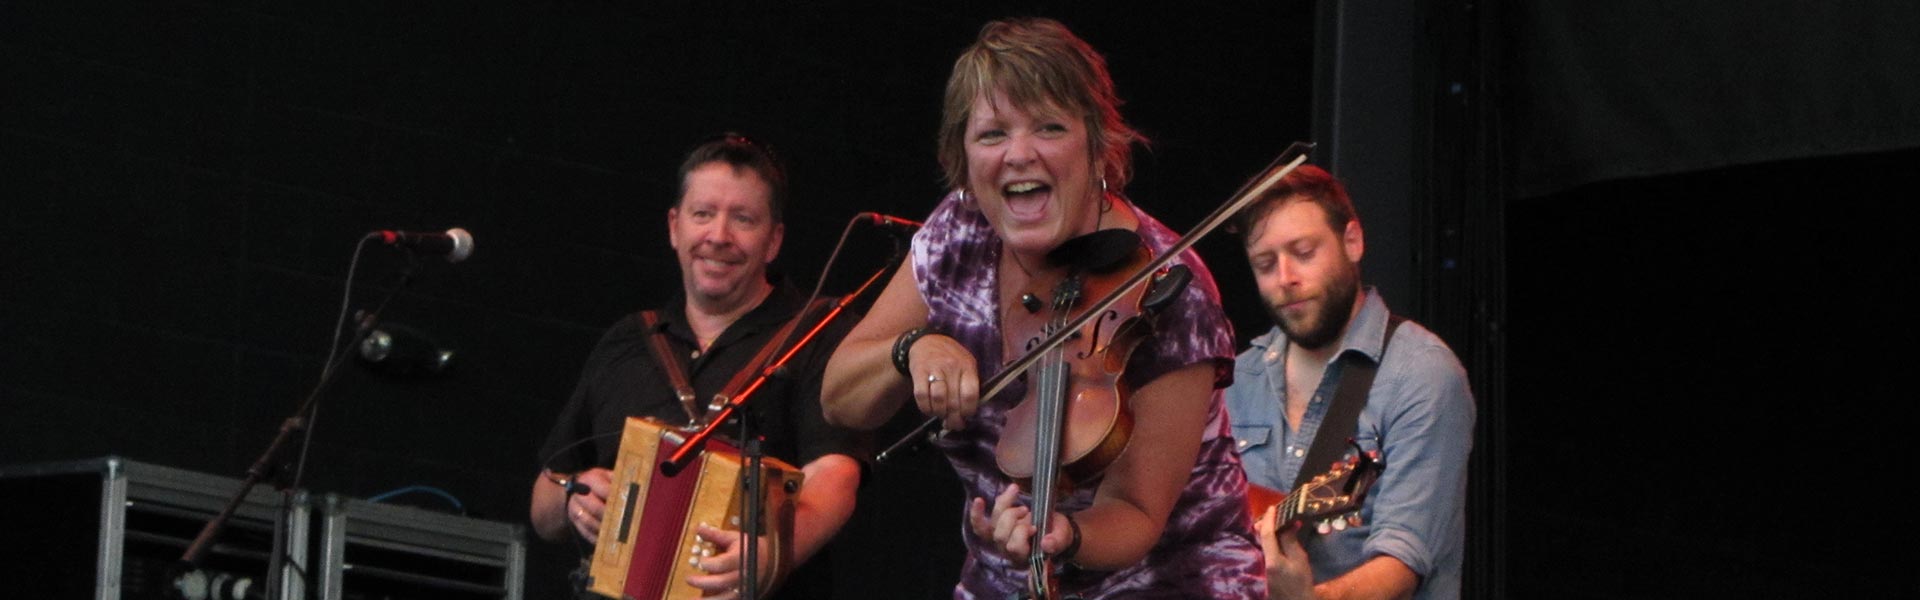 Eileen Ivers playing fiddle